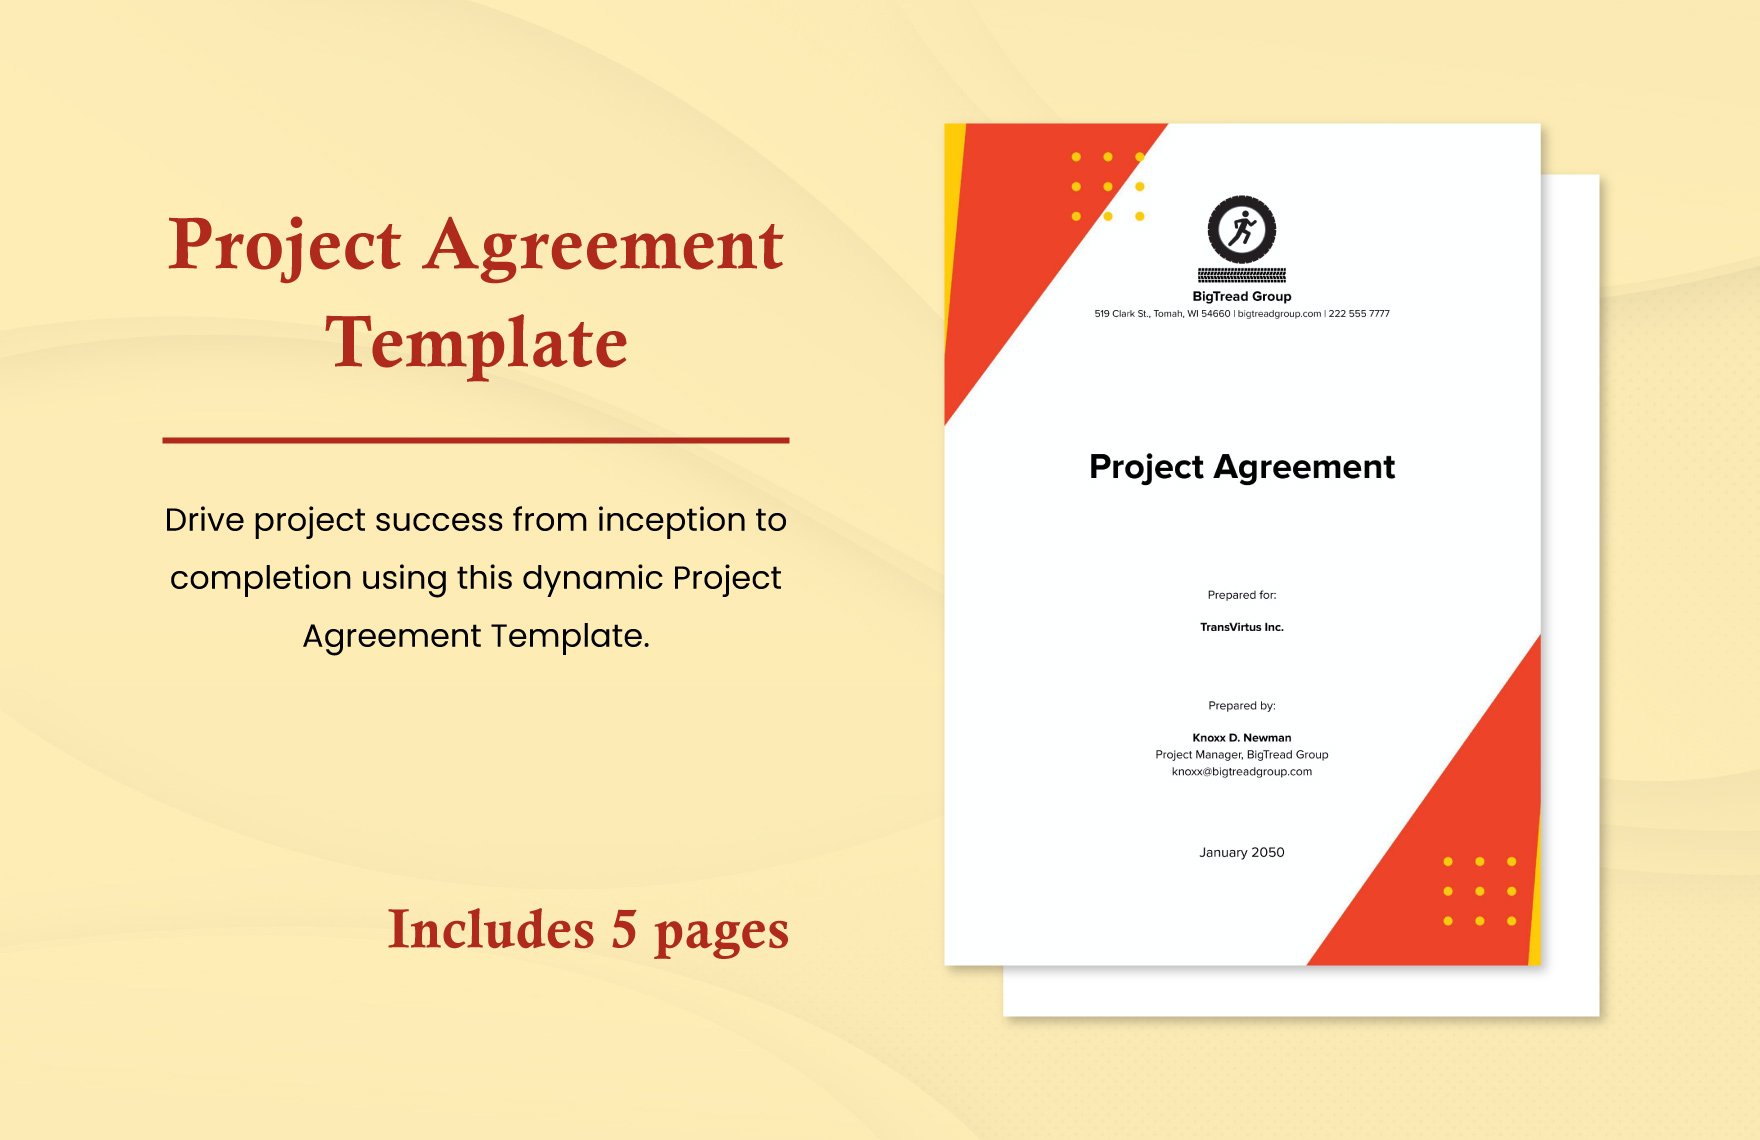 Project Agreement Template